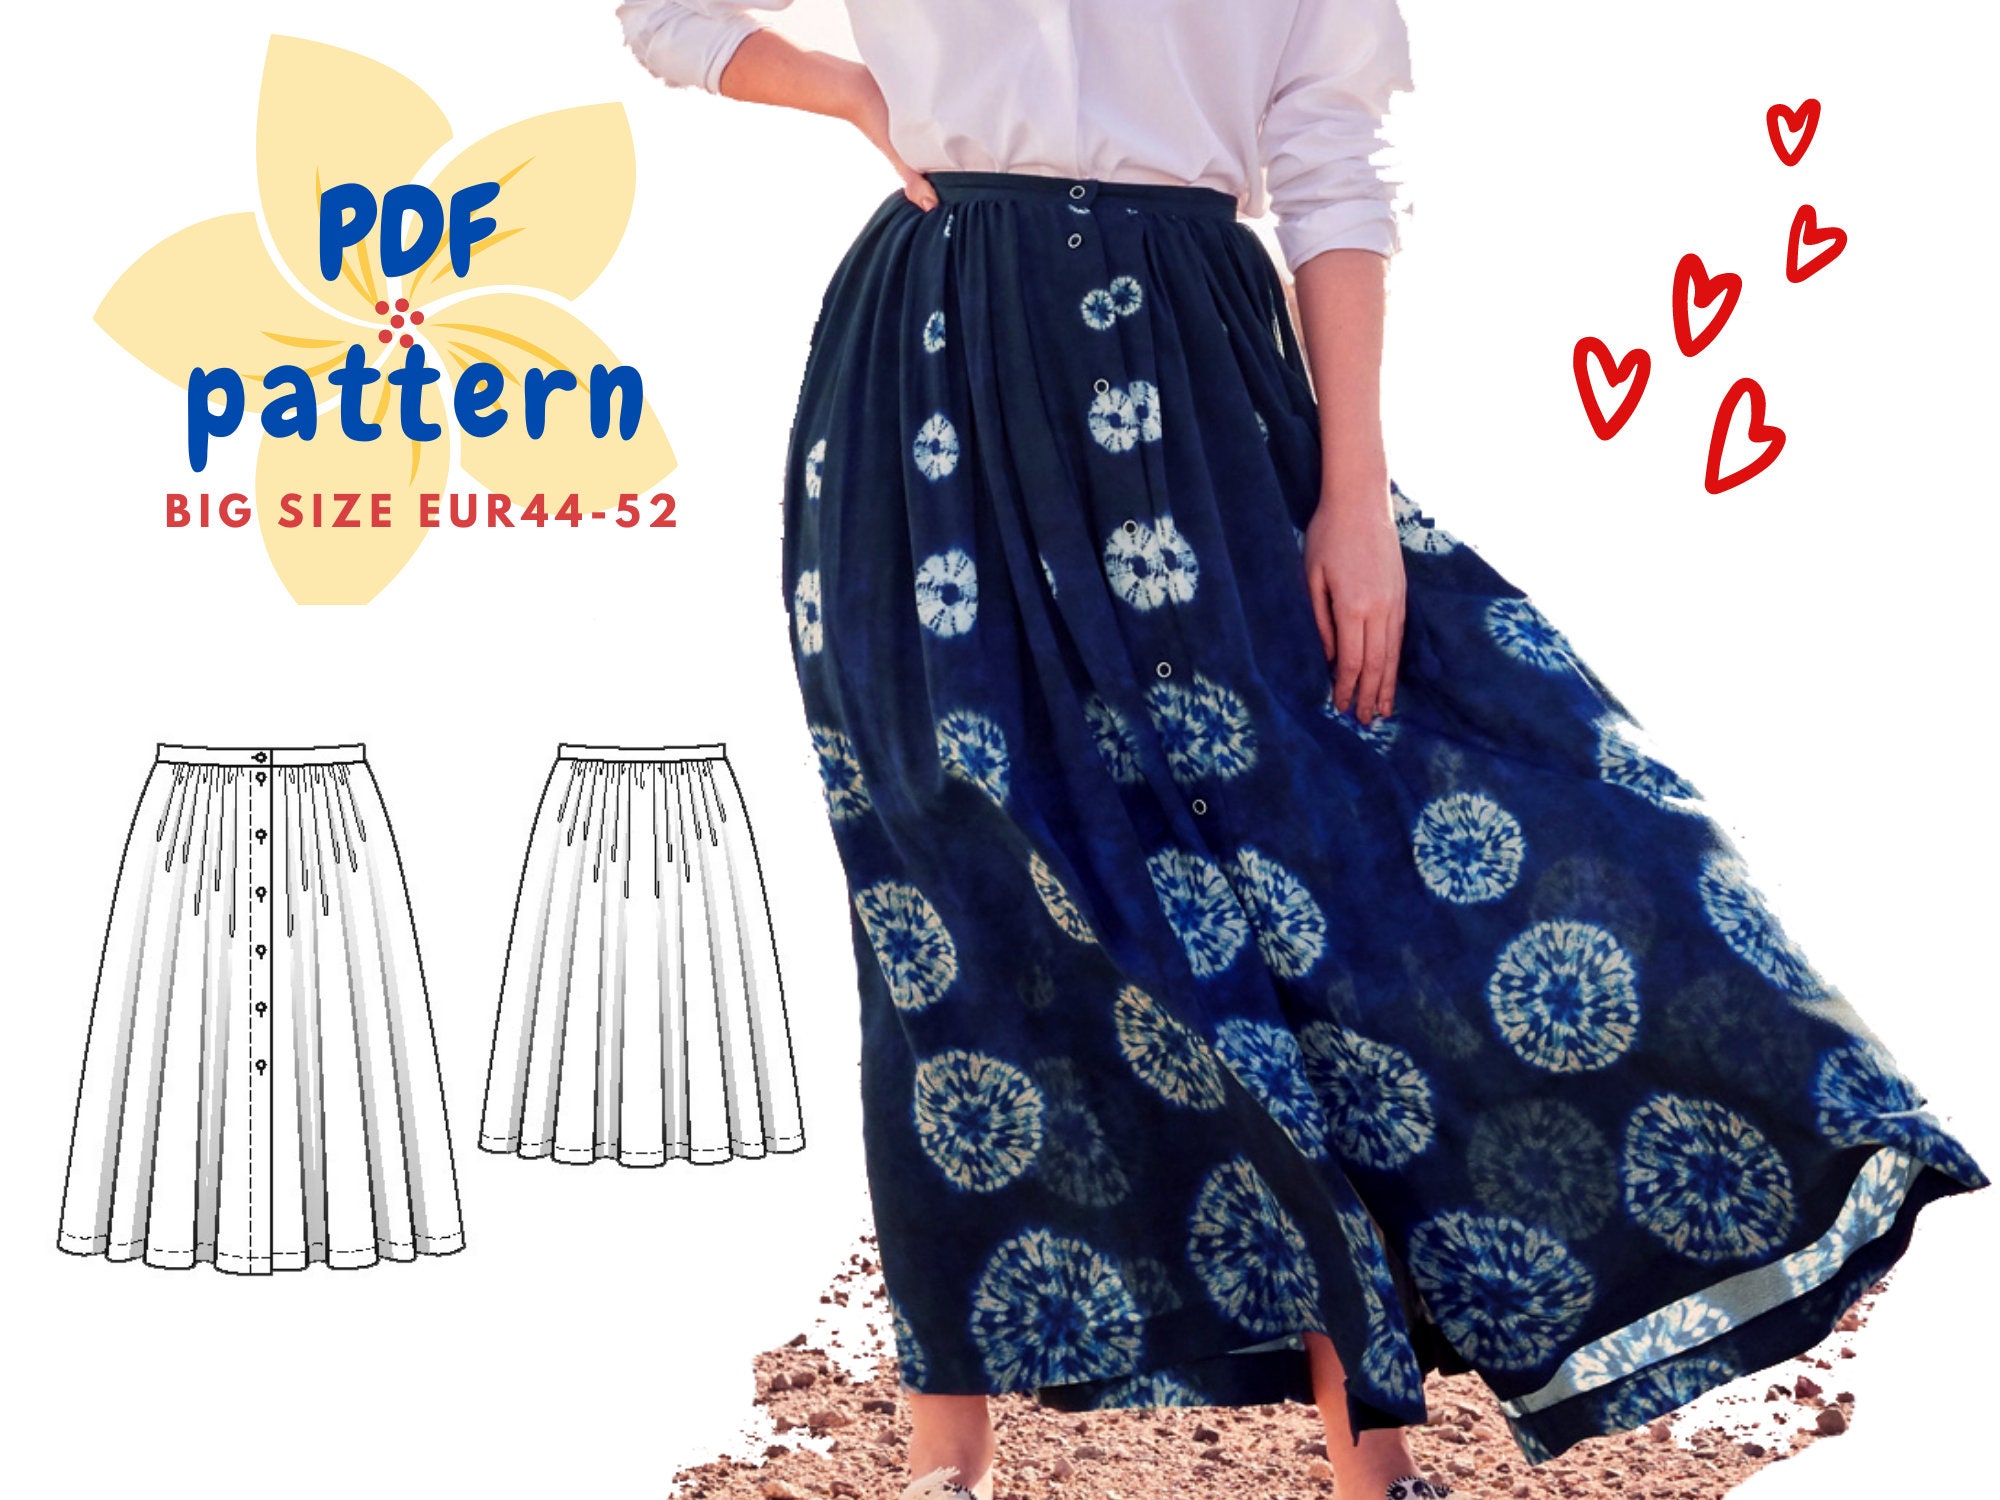 Fluffy skirt for women big size EUR 44-52 / sewing pattern | Etsy